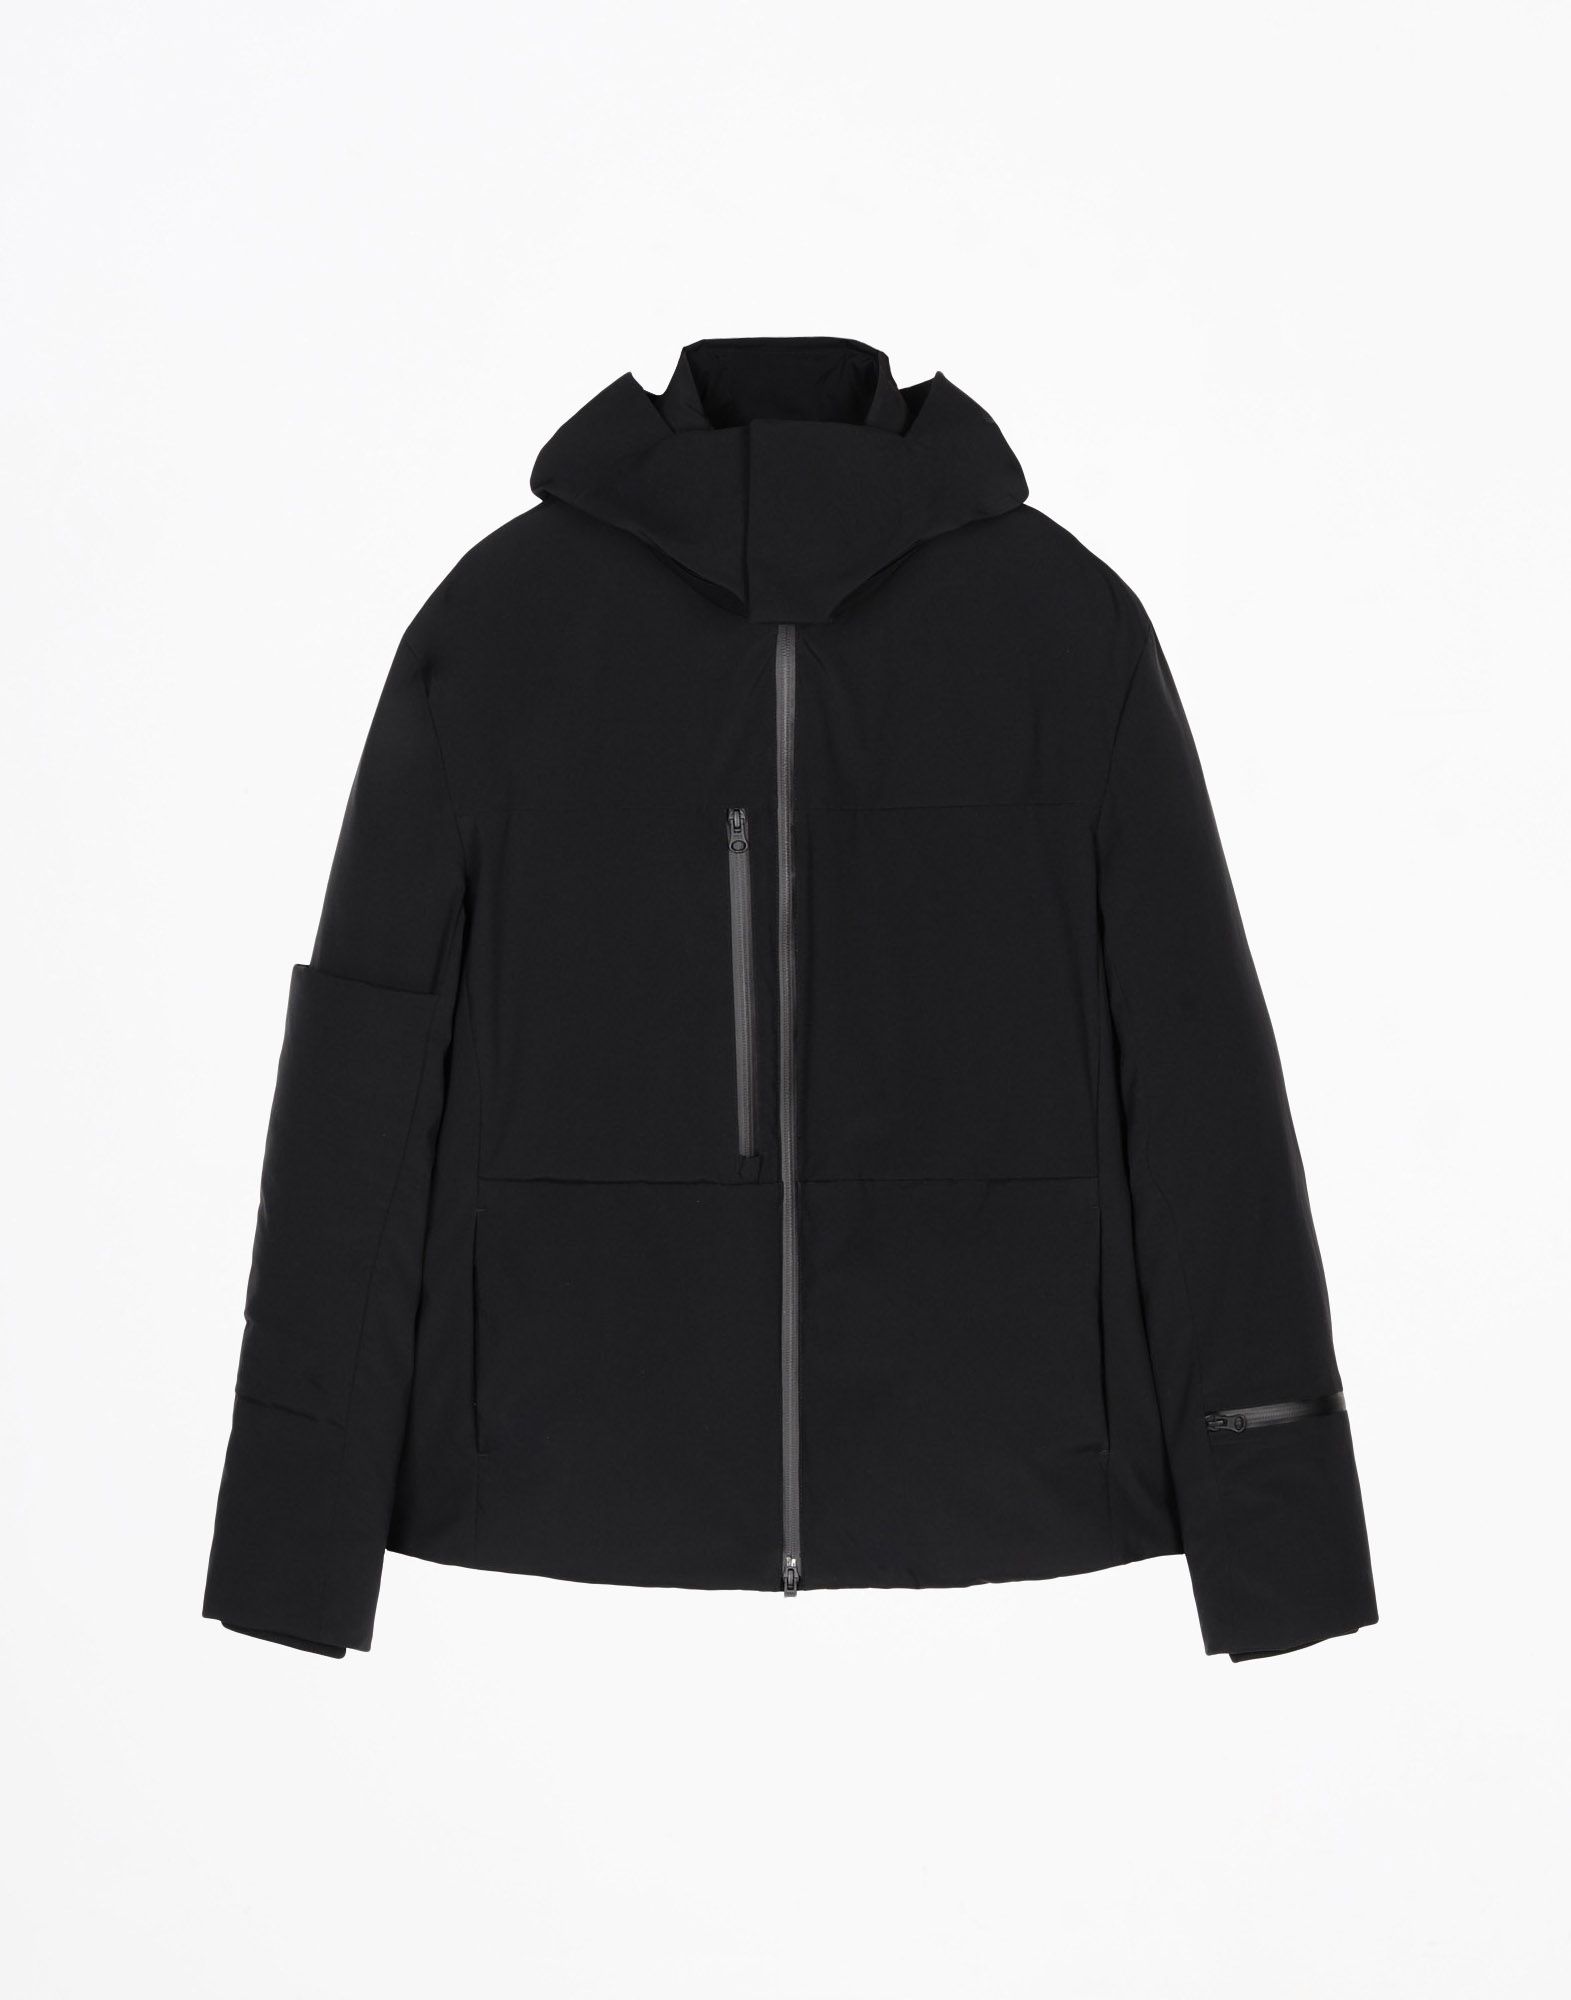 Y 3 MATTE DOWN JACKET for Men | Adidas Y-3 Official Store